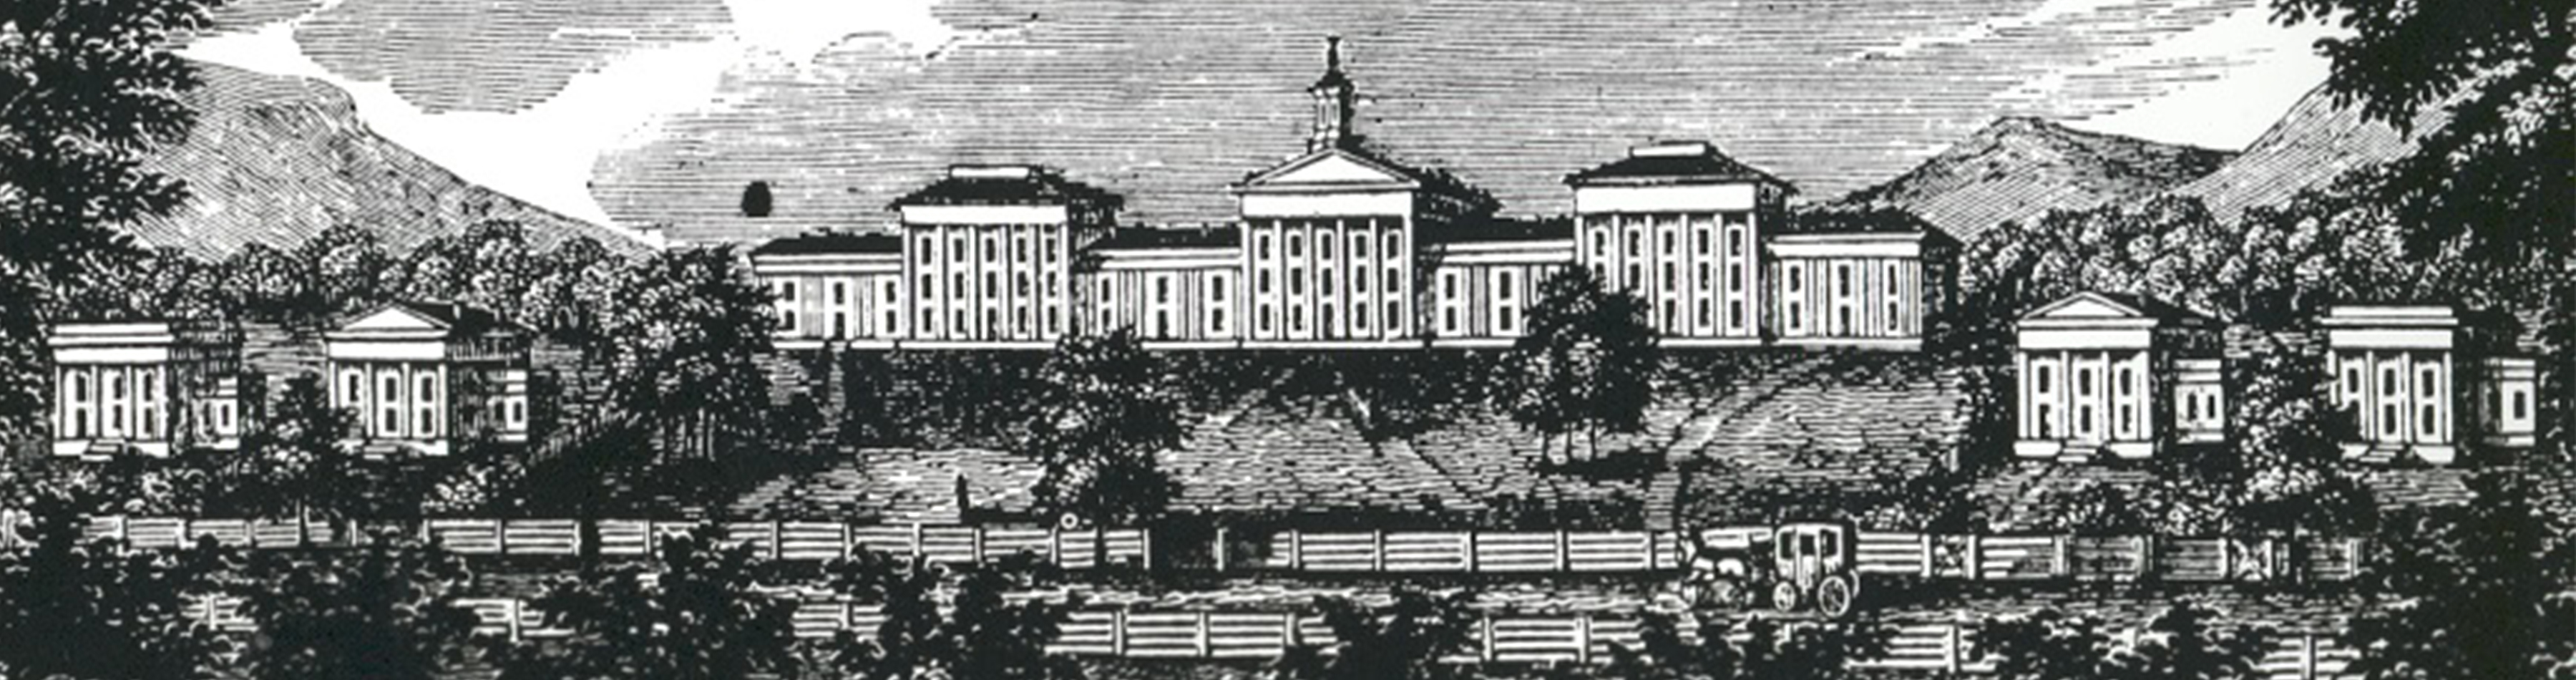 Colonnade woodcut image